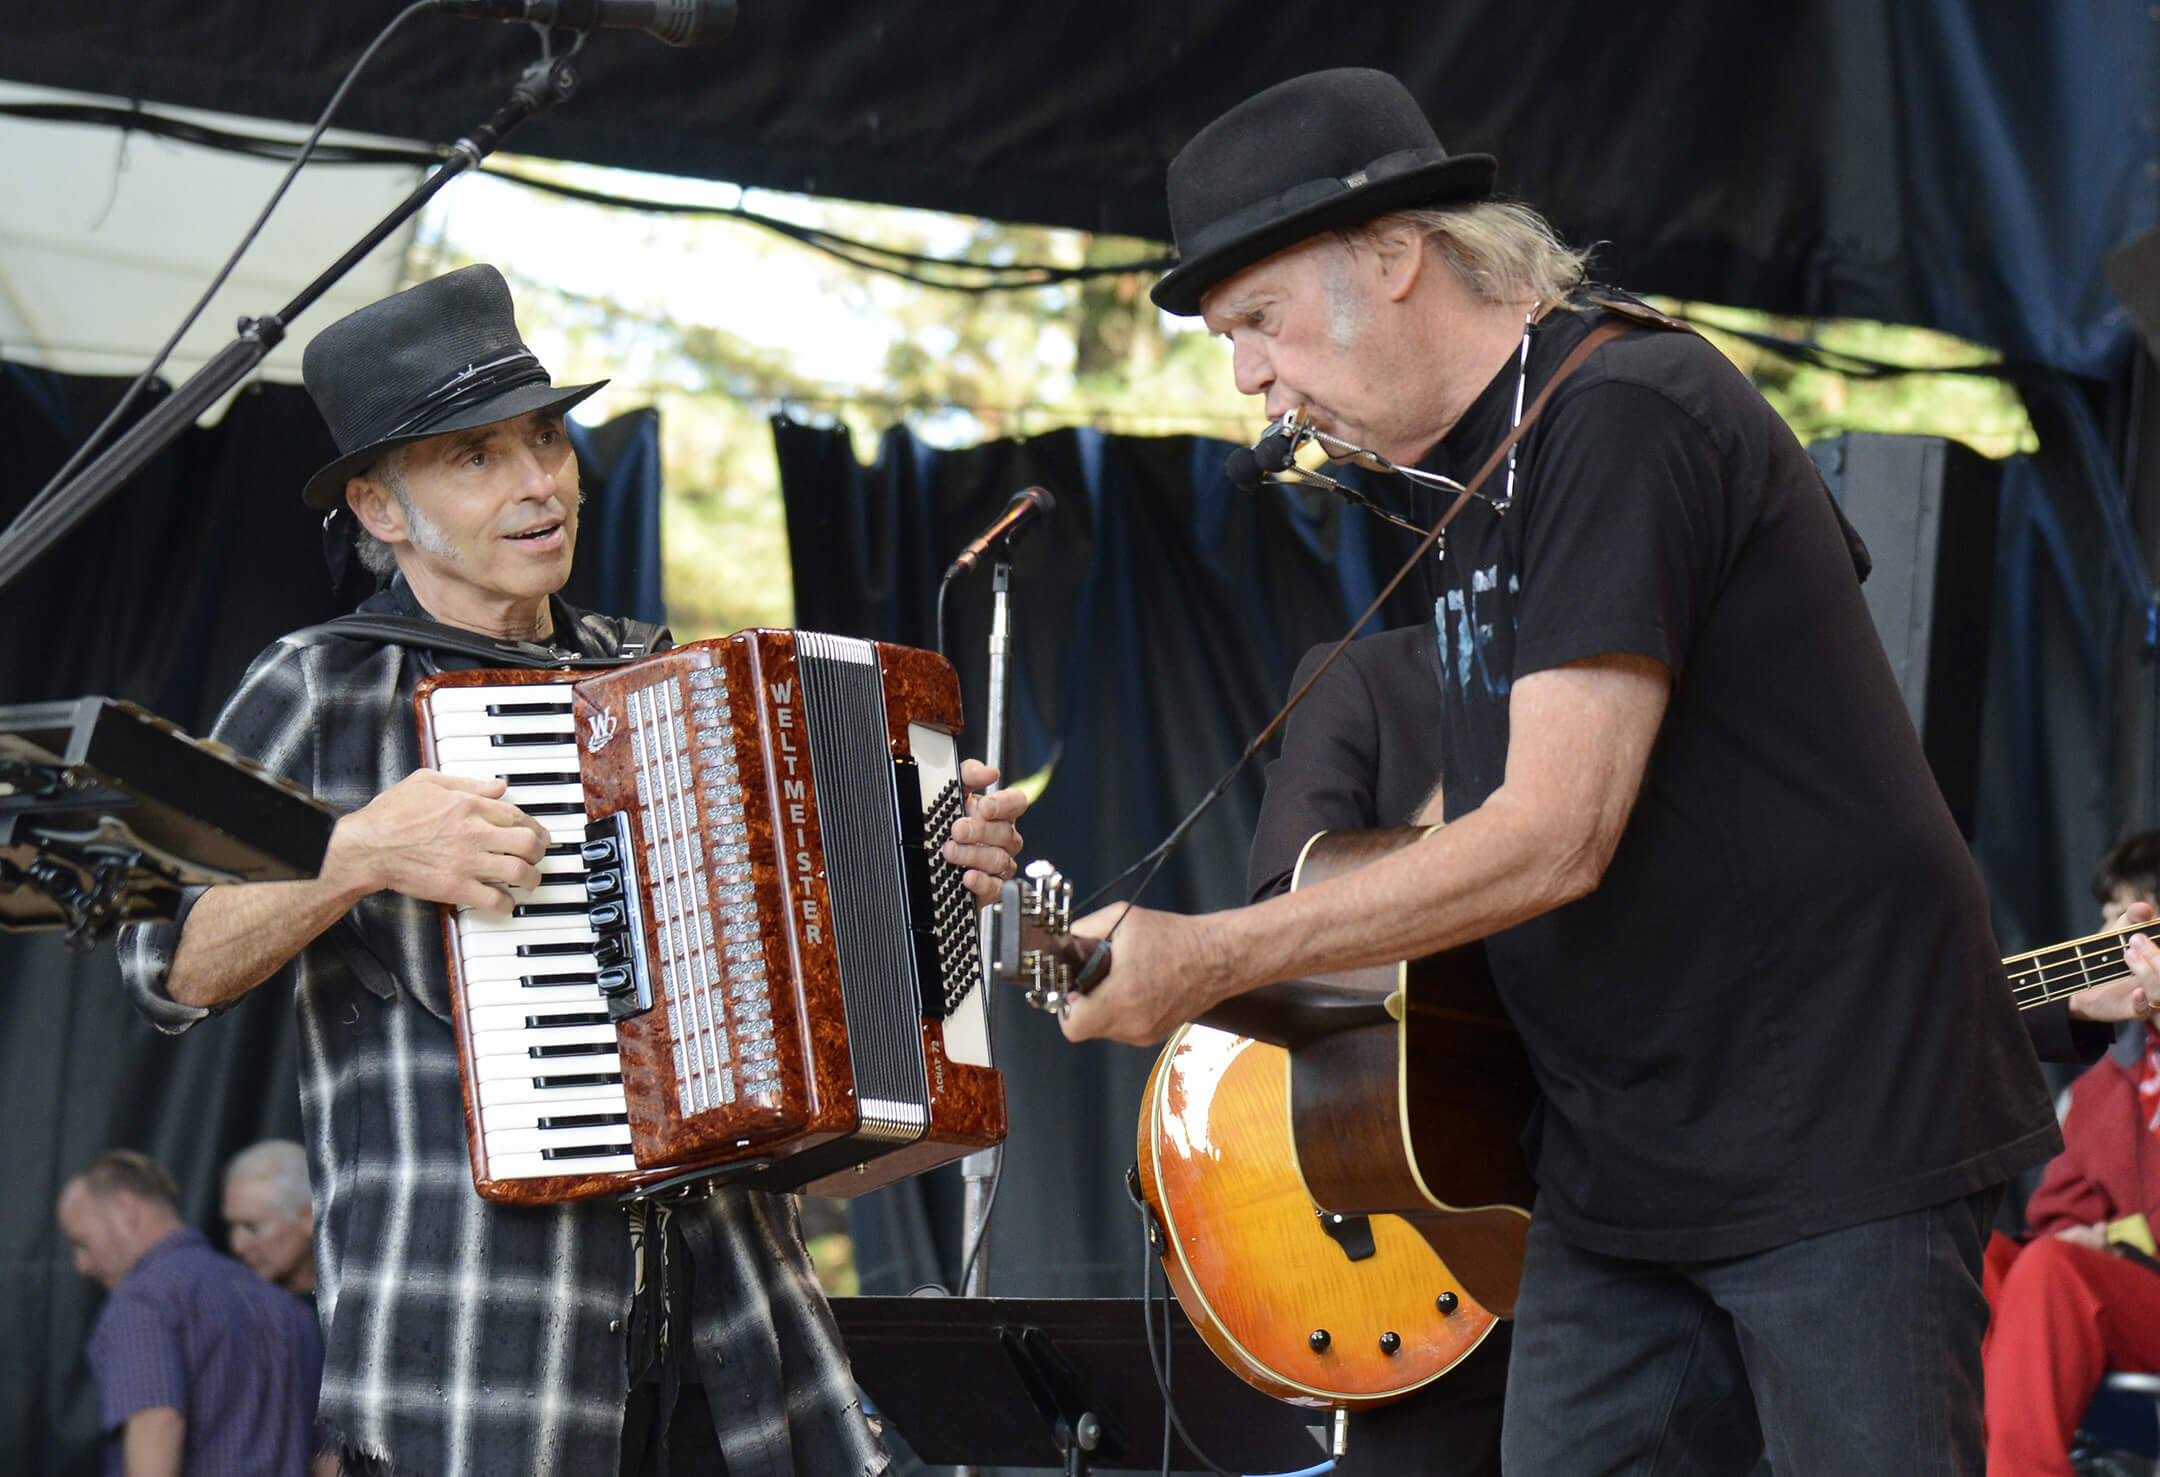 Nils Lofgren and Neil Young perform with My Morning Jacket during the 30th Annual Bridge School Benefit at Shoreline Amphitheatre on October 23, 2016 in Mountain View, California.